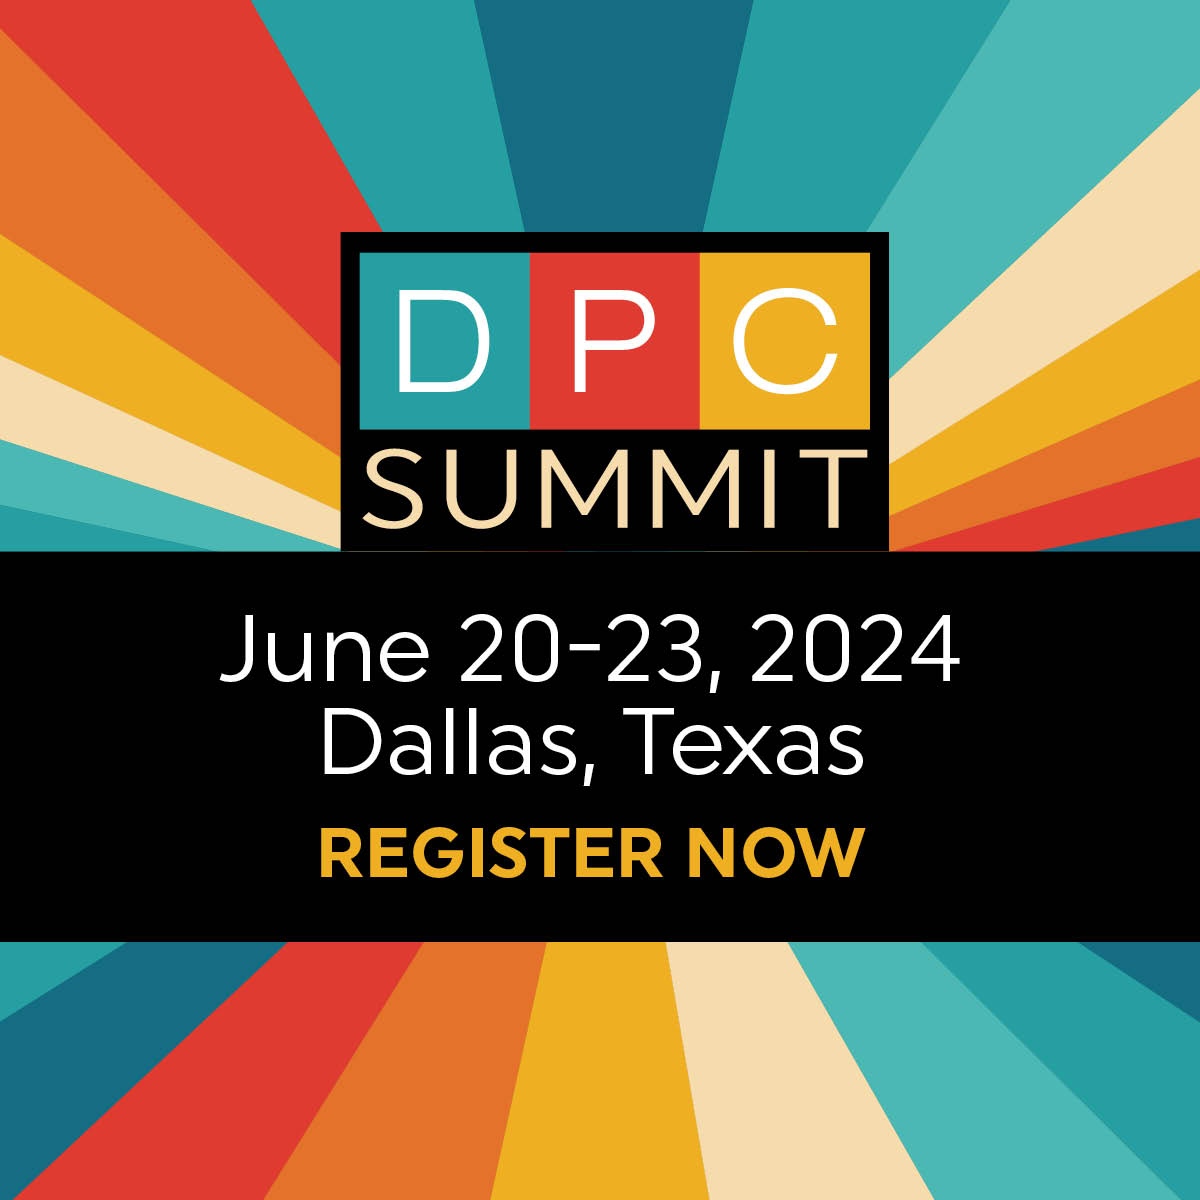 Wherever you are in your Direct Primary Care journey, join us in Dallas, Texas, June 20–23 to elevate your #DPC knowledge and skills. We'll be there to provide hands-on workshops! Register today: ow.ly/V8NG50QVCw1